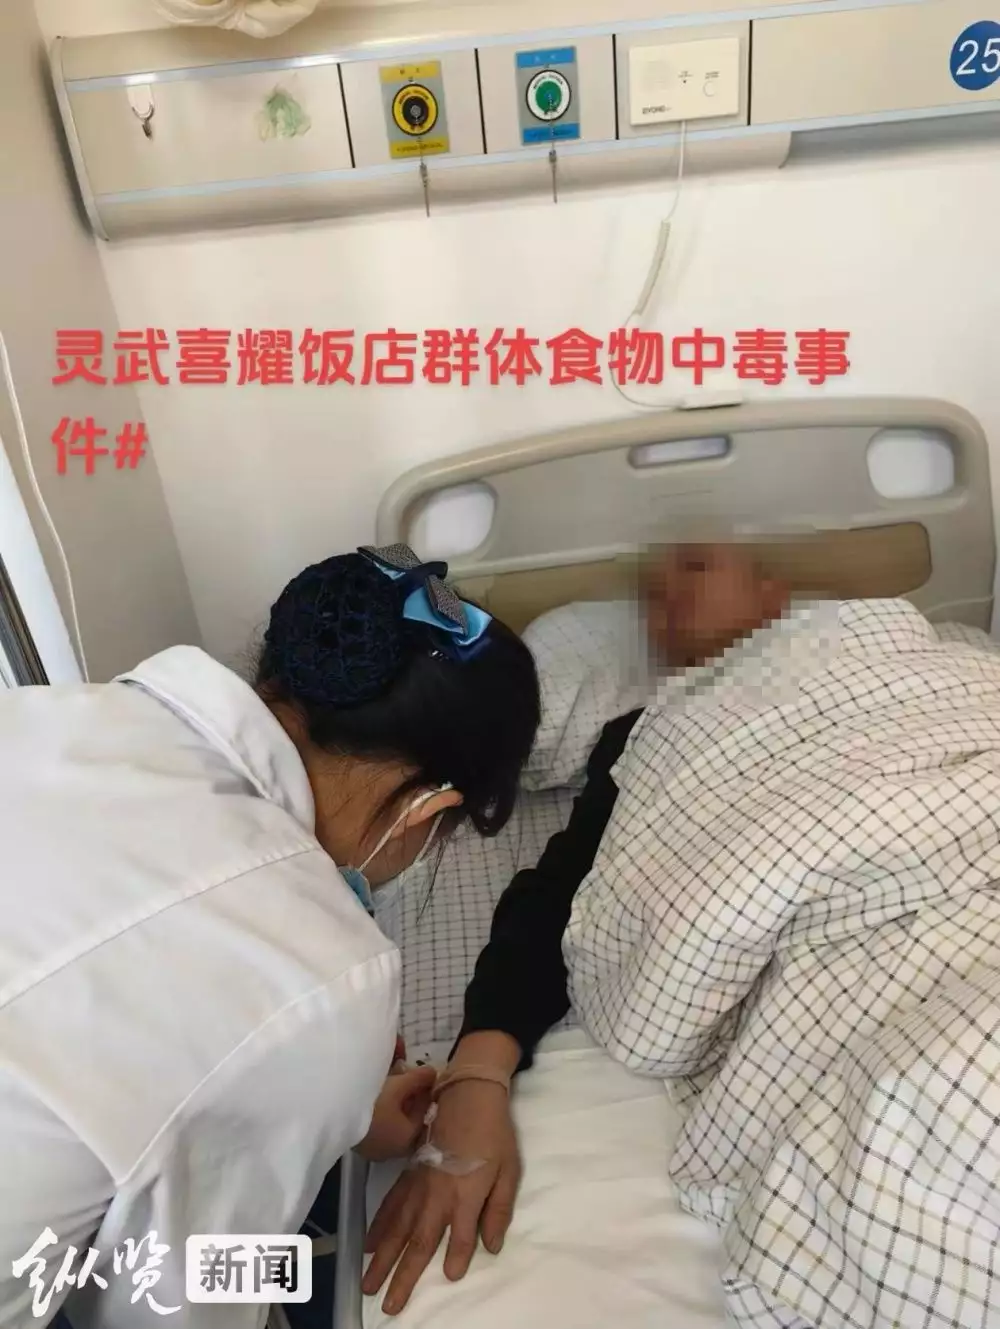 More than 60 people were hospitalized after participating in the wedding banquet. The official report： Mixed infection of E. coli and Salmonella, and has been ordered to stop the restaurant and rectif